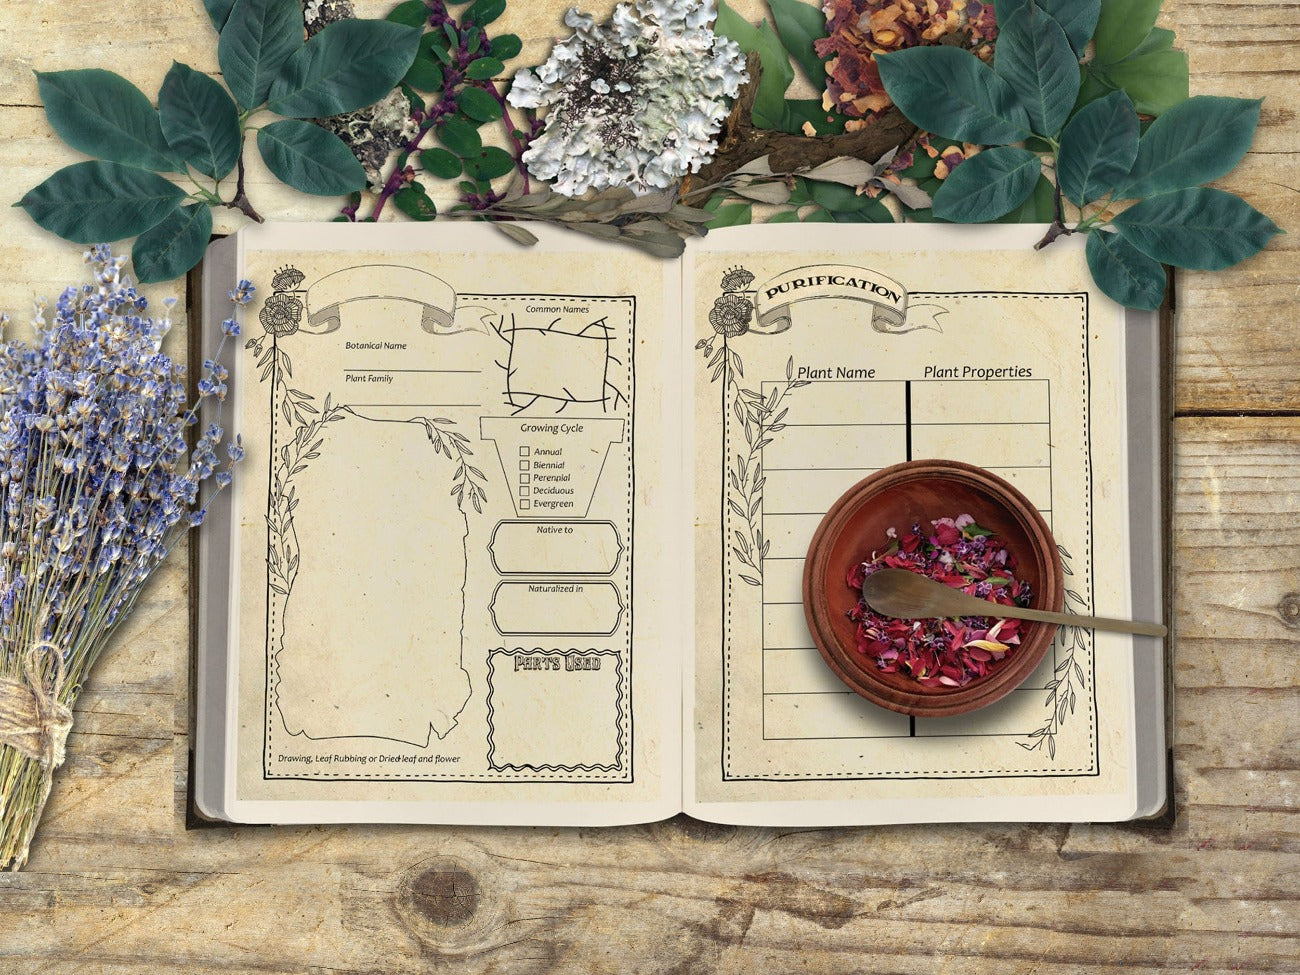 WITCH HERBAL Junk Journal Planner, 25 Pages, Witchy Apothecary Journal, Wicca Herb Magick, Witchcraft Herbal Garden DIY Grimoire - Morgana Magick Spell